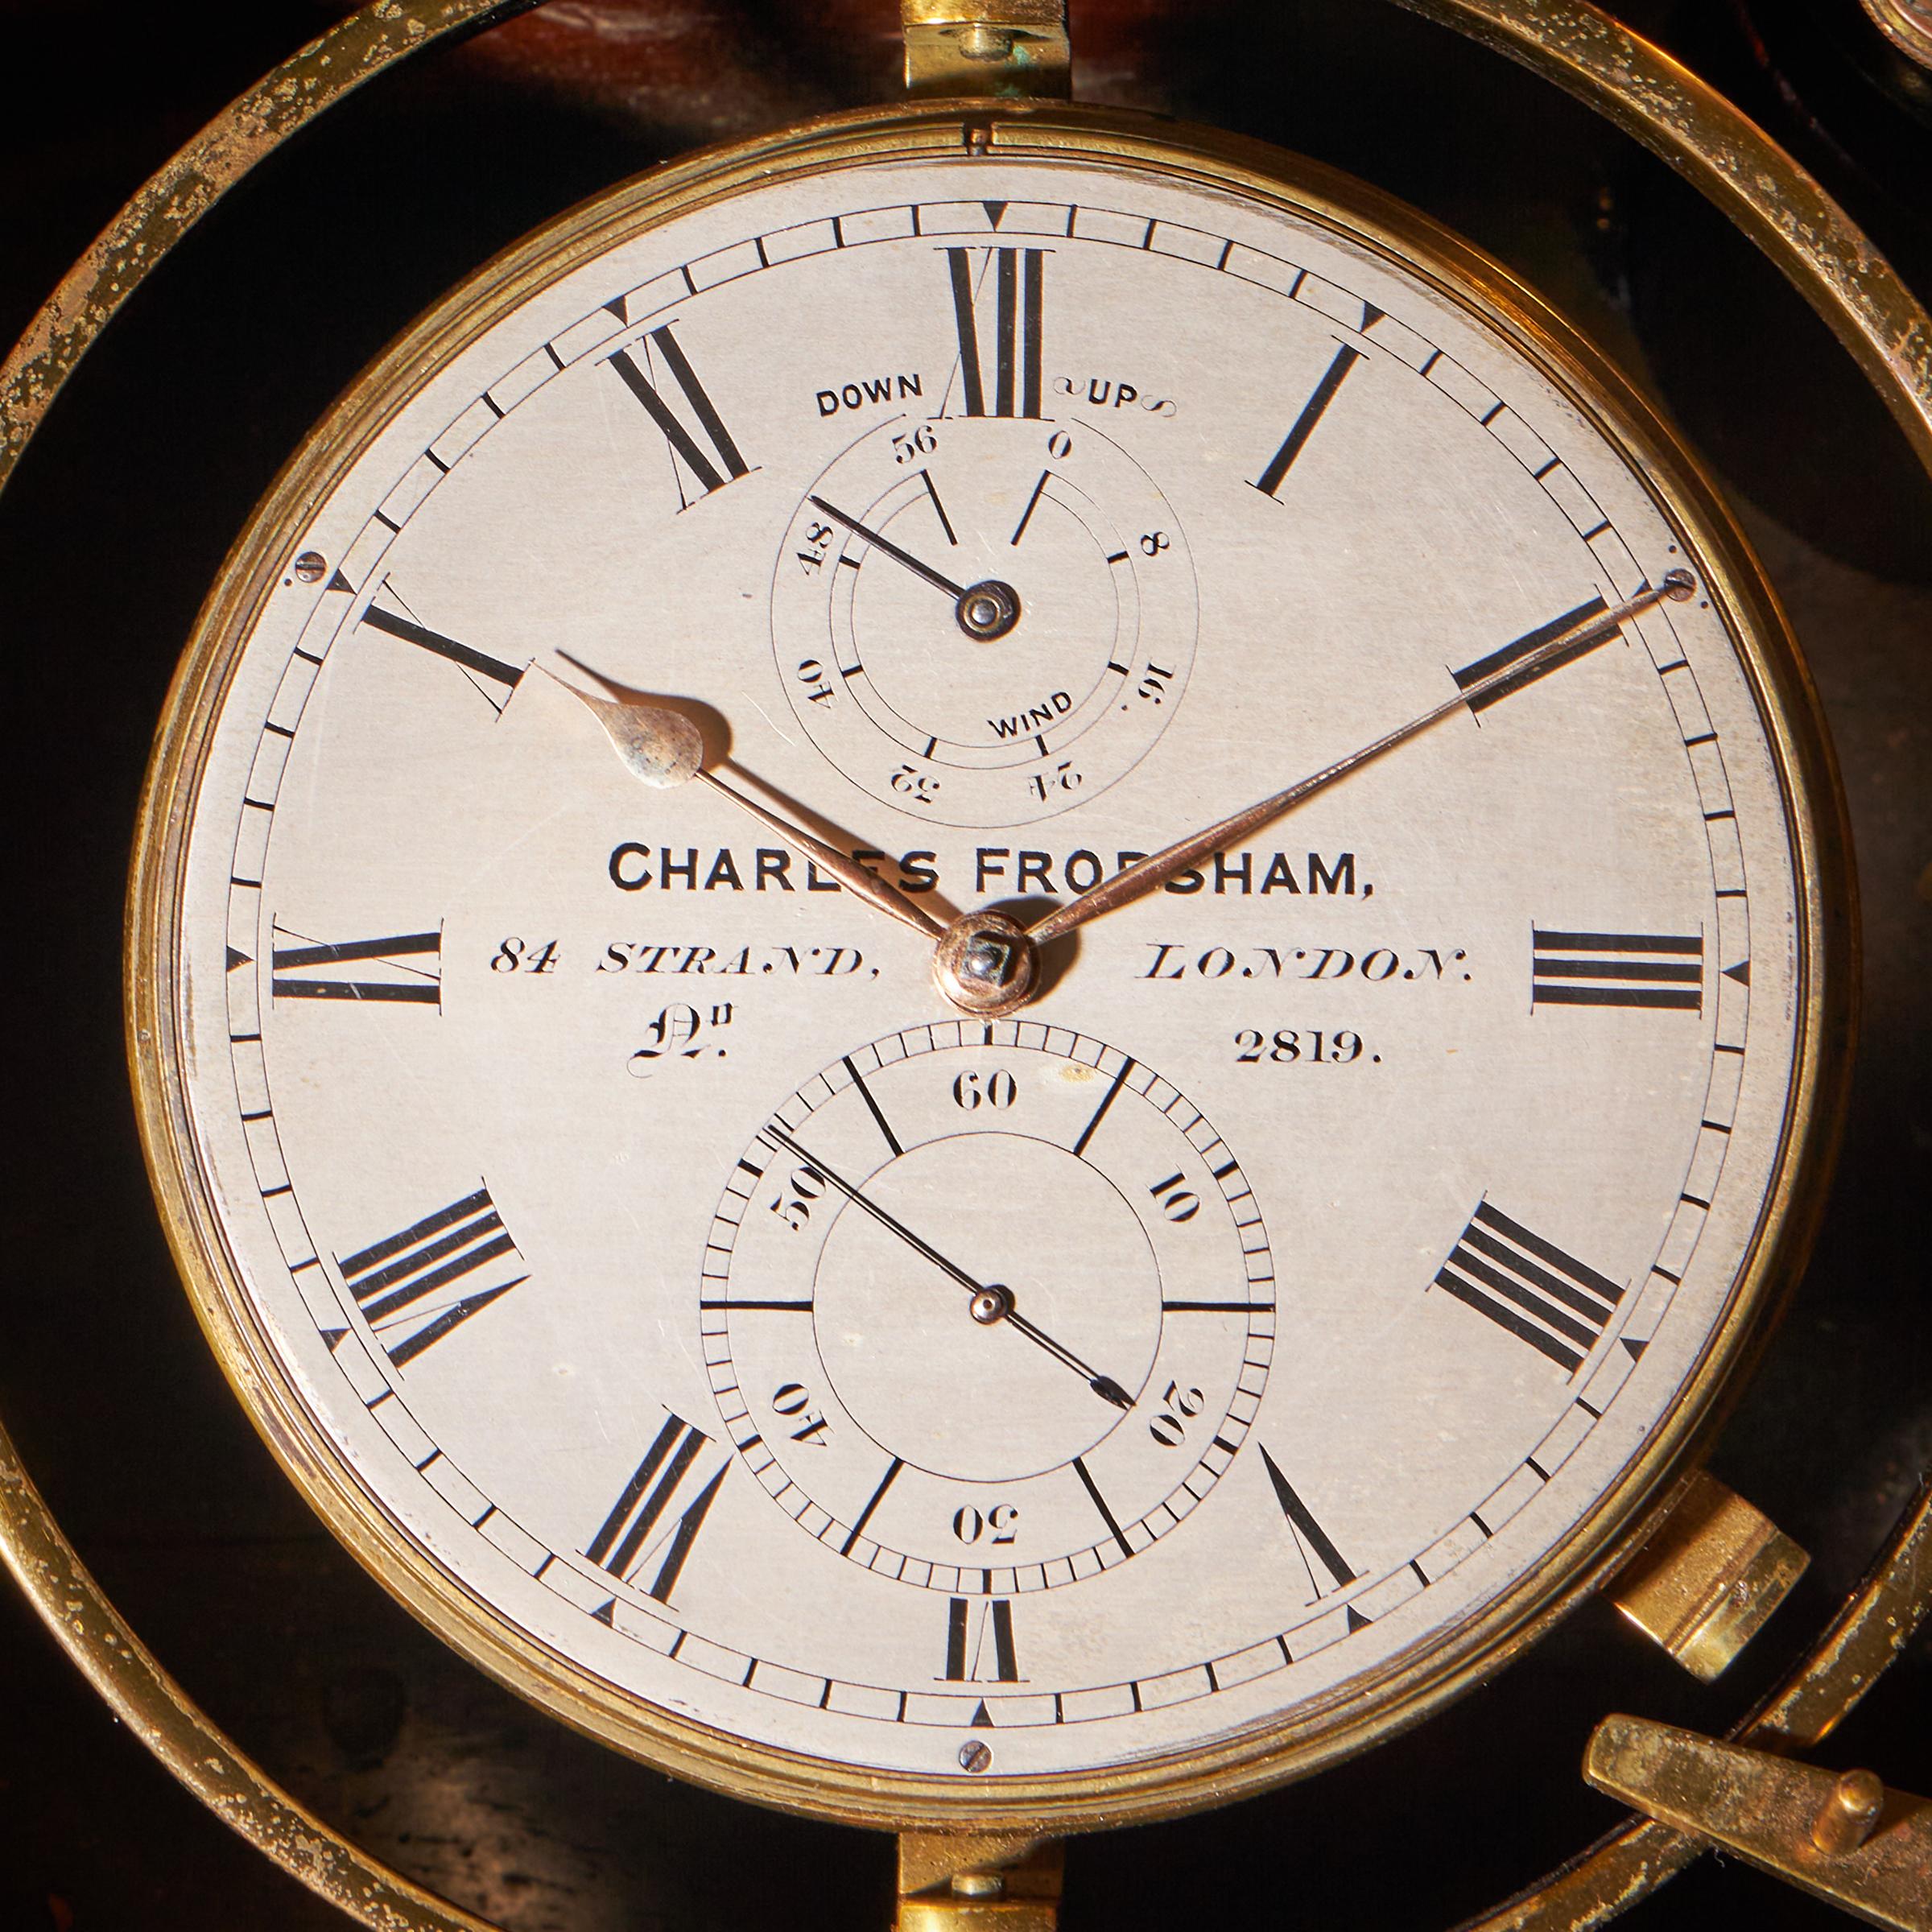 Fine Two-Day Marine Chronometer Signed Charles Frodsham For Sale 4